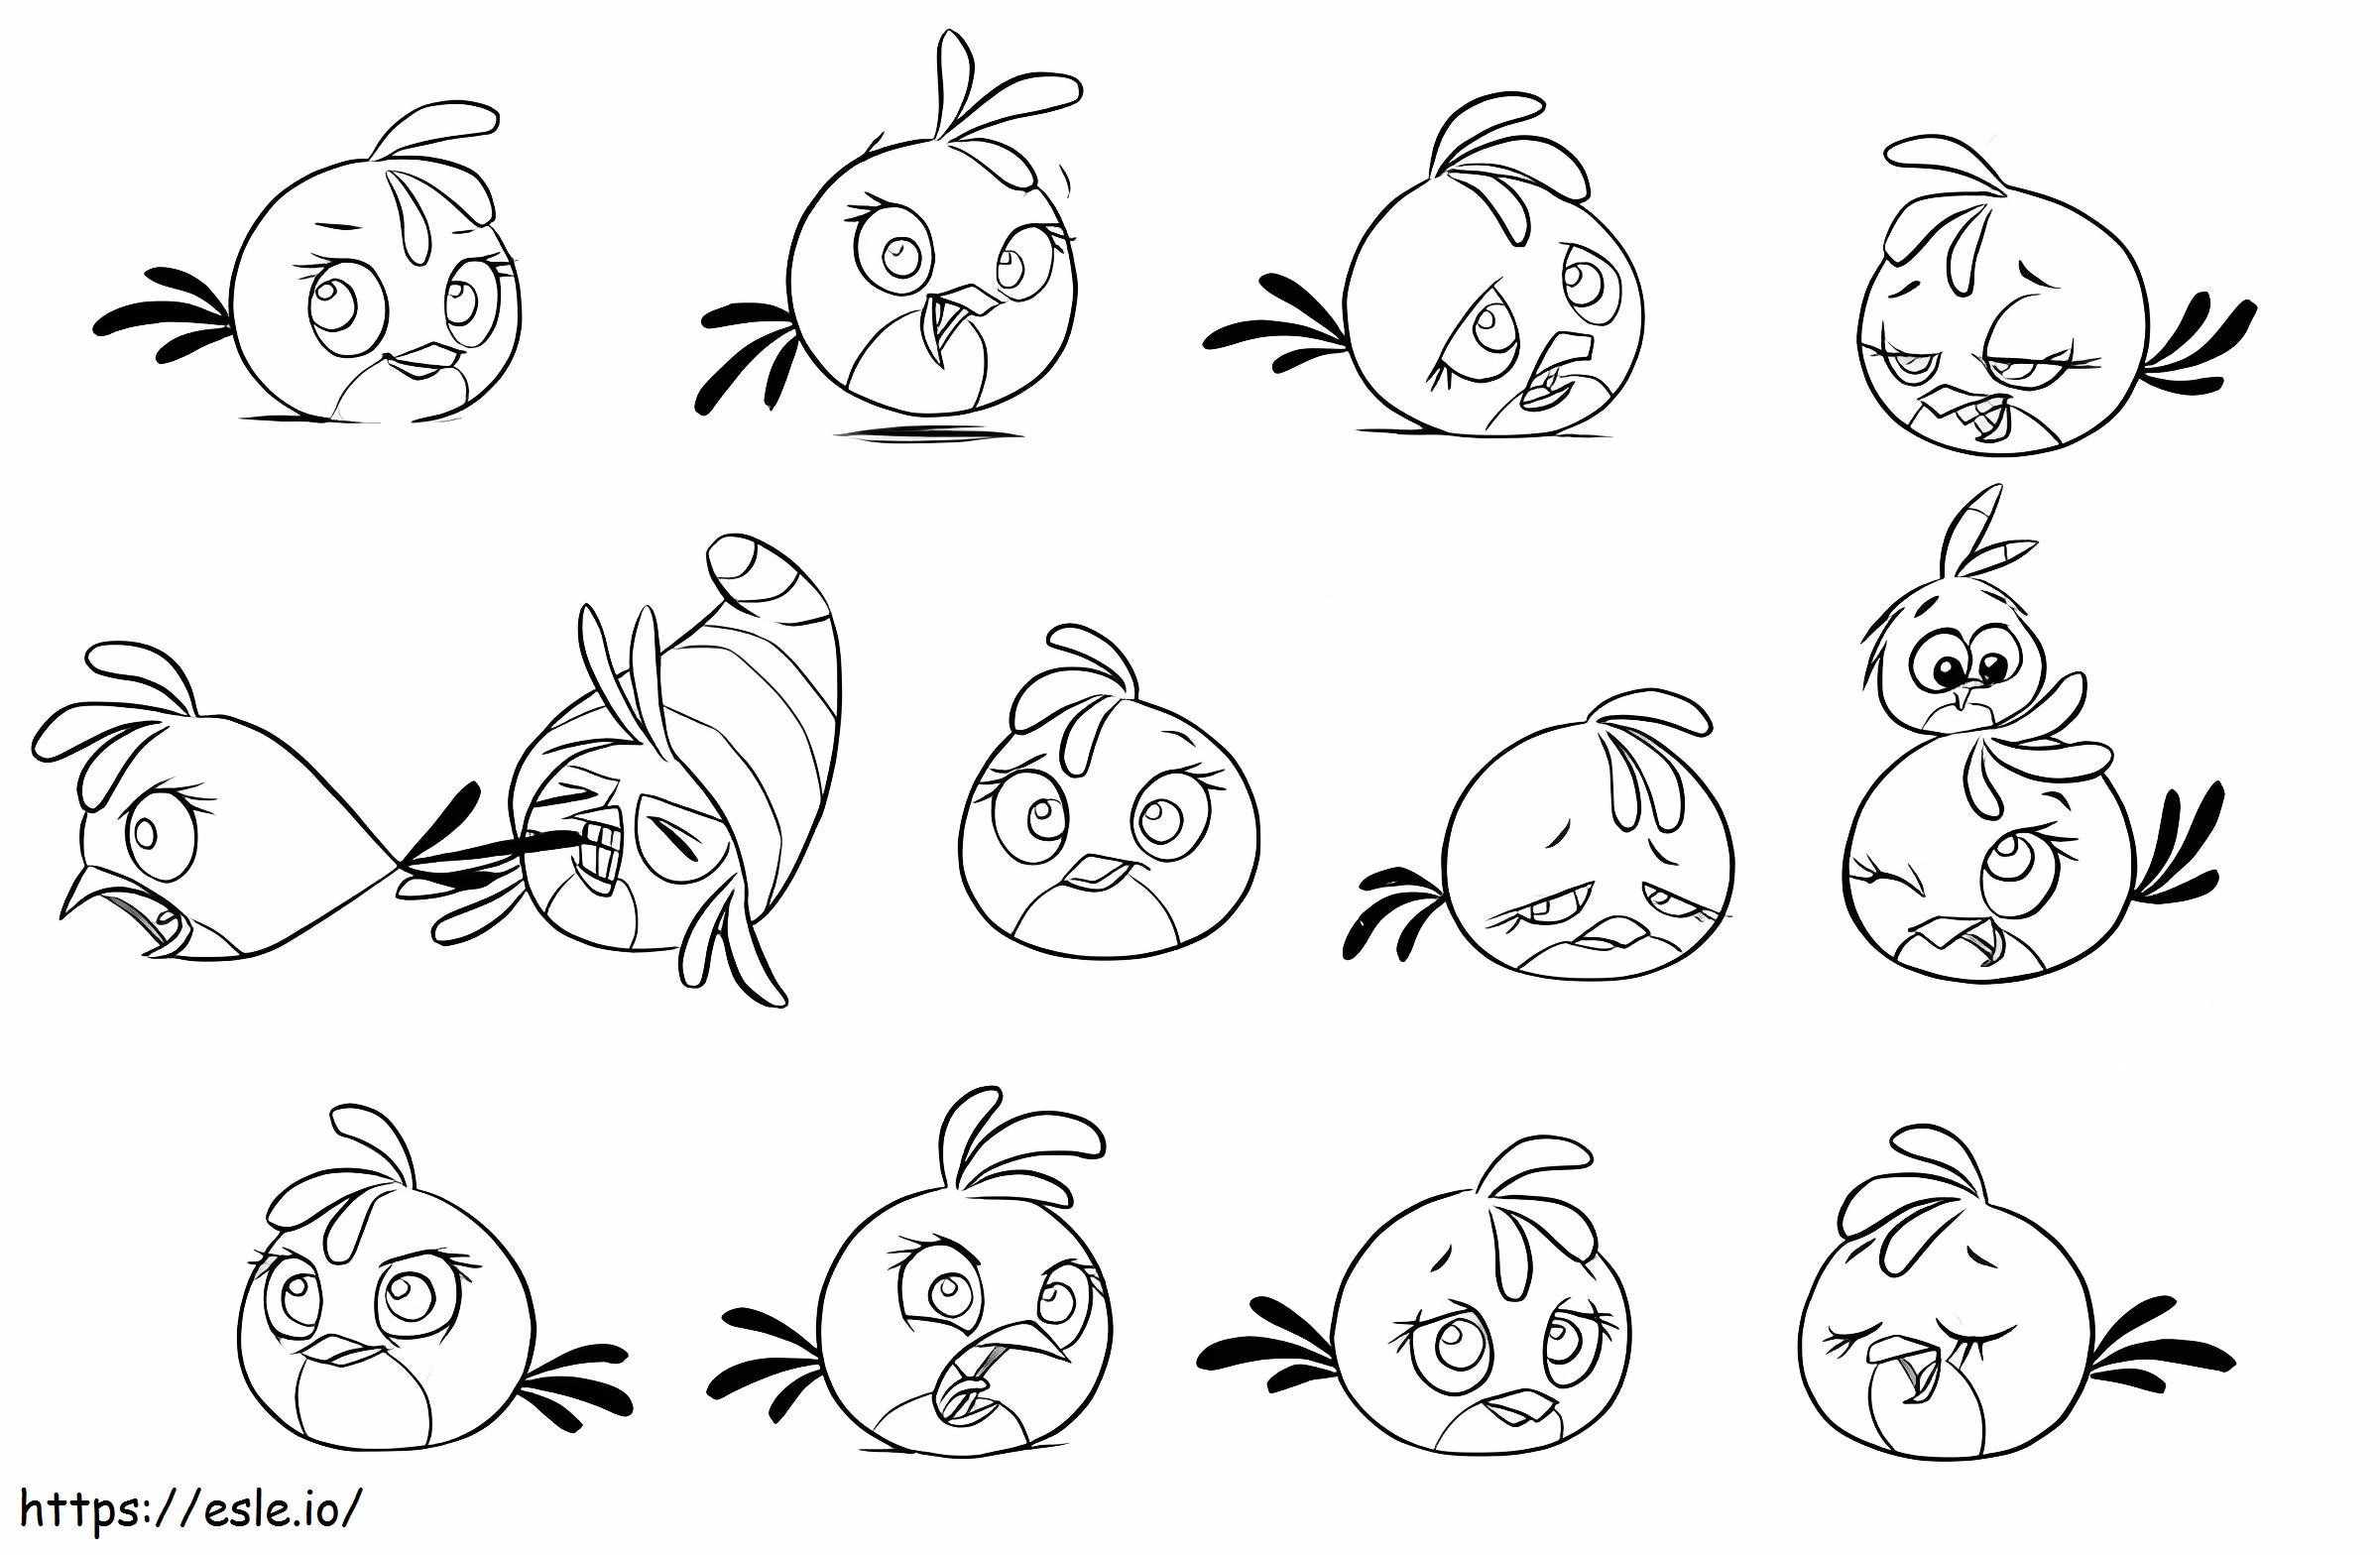 All Types Of Angry Stella Birds coloring page